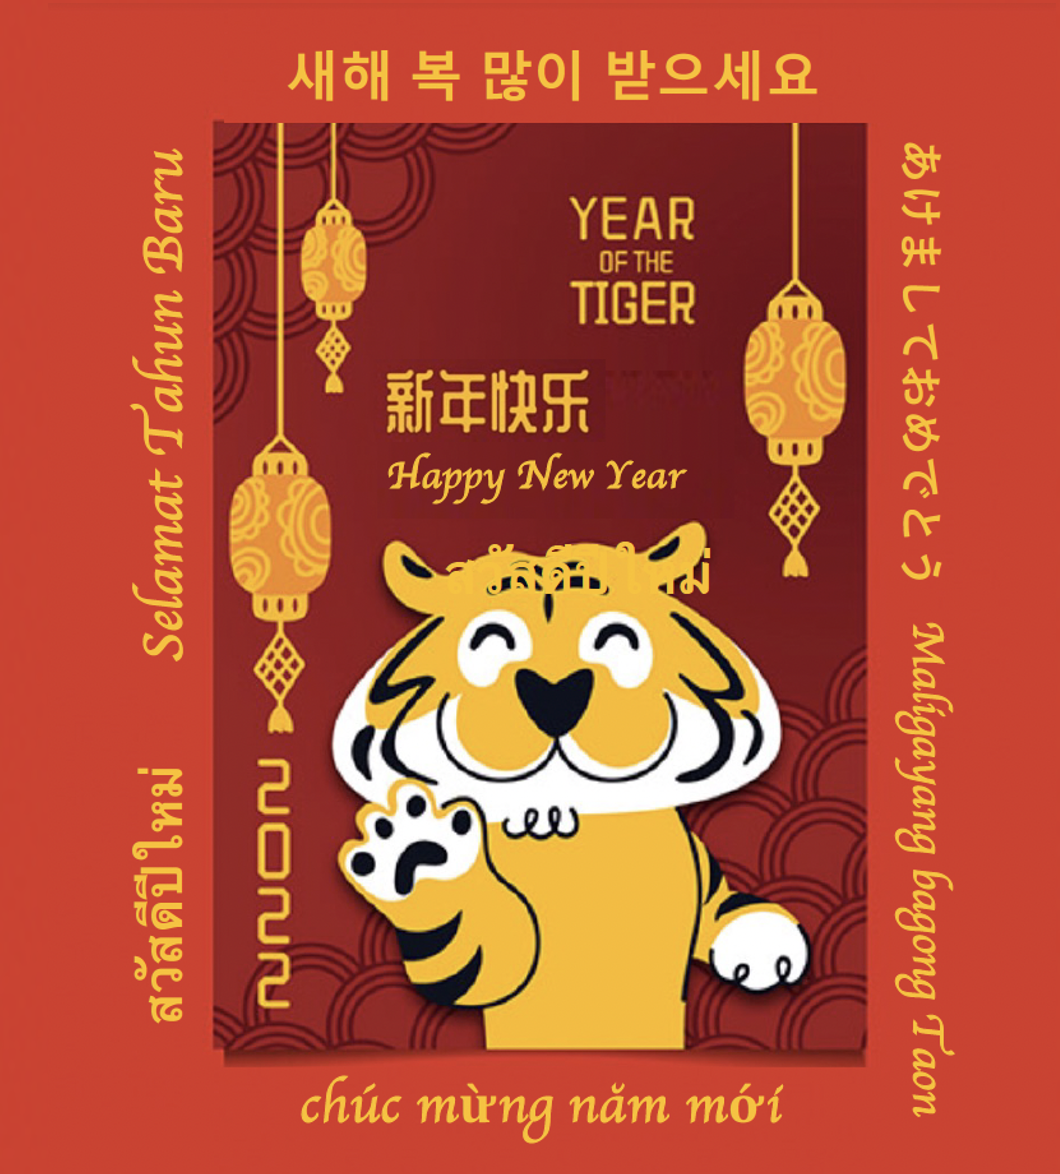 Lunar New Year poster with happy new year in different languages